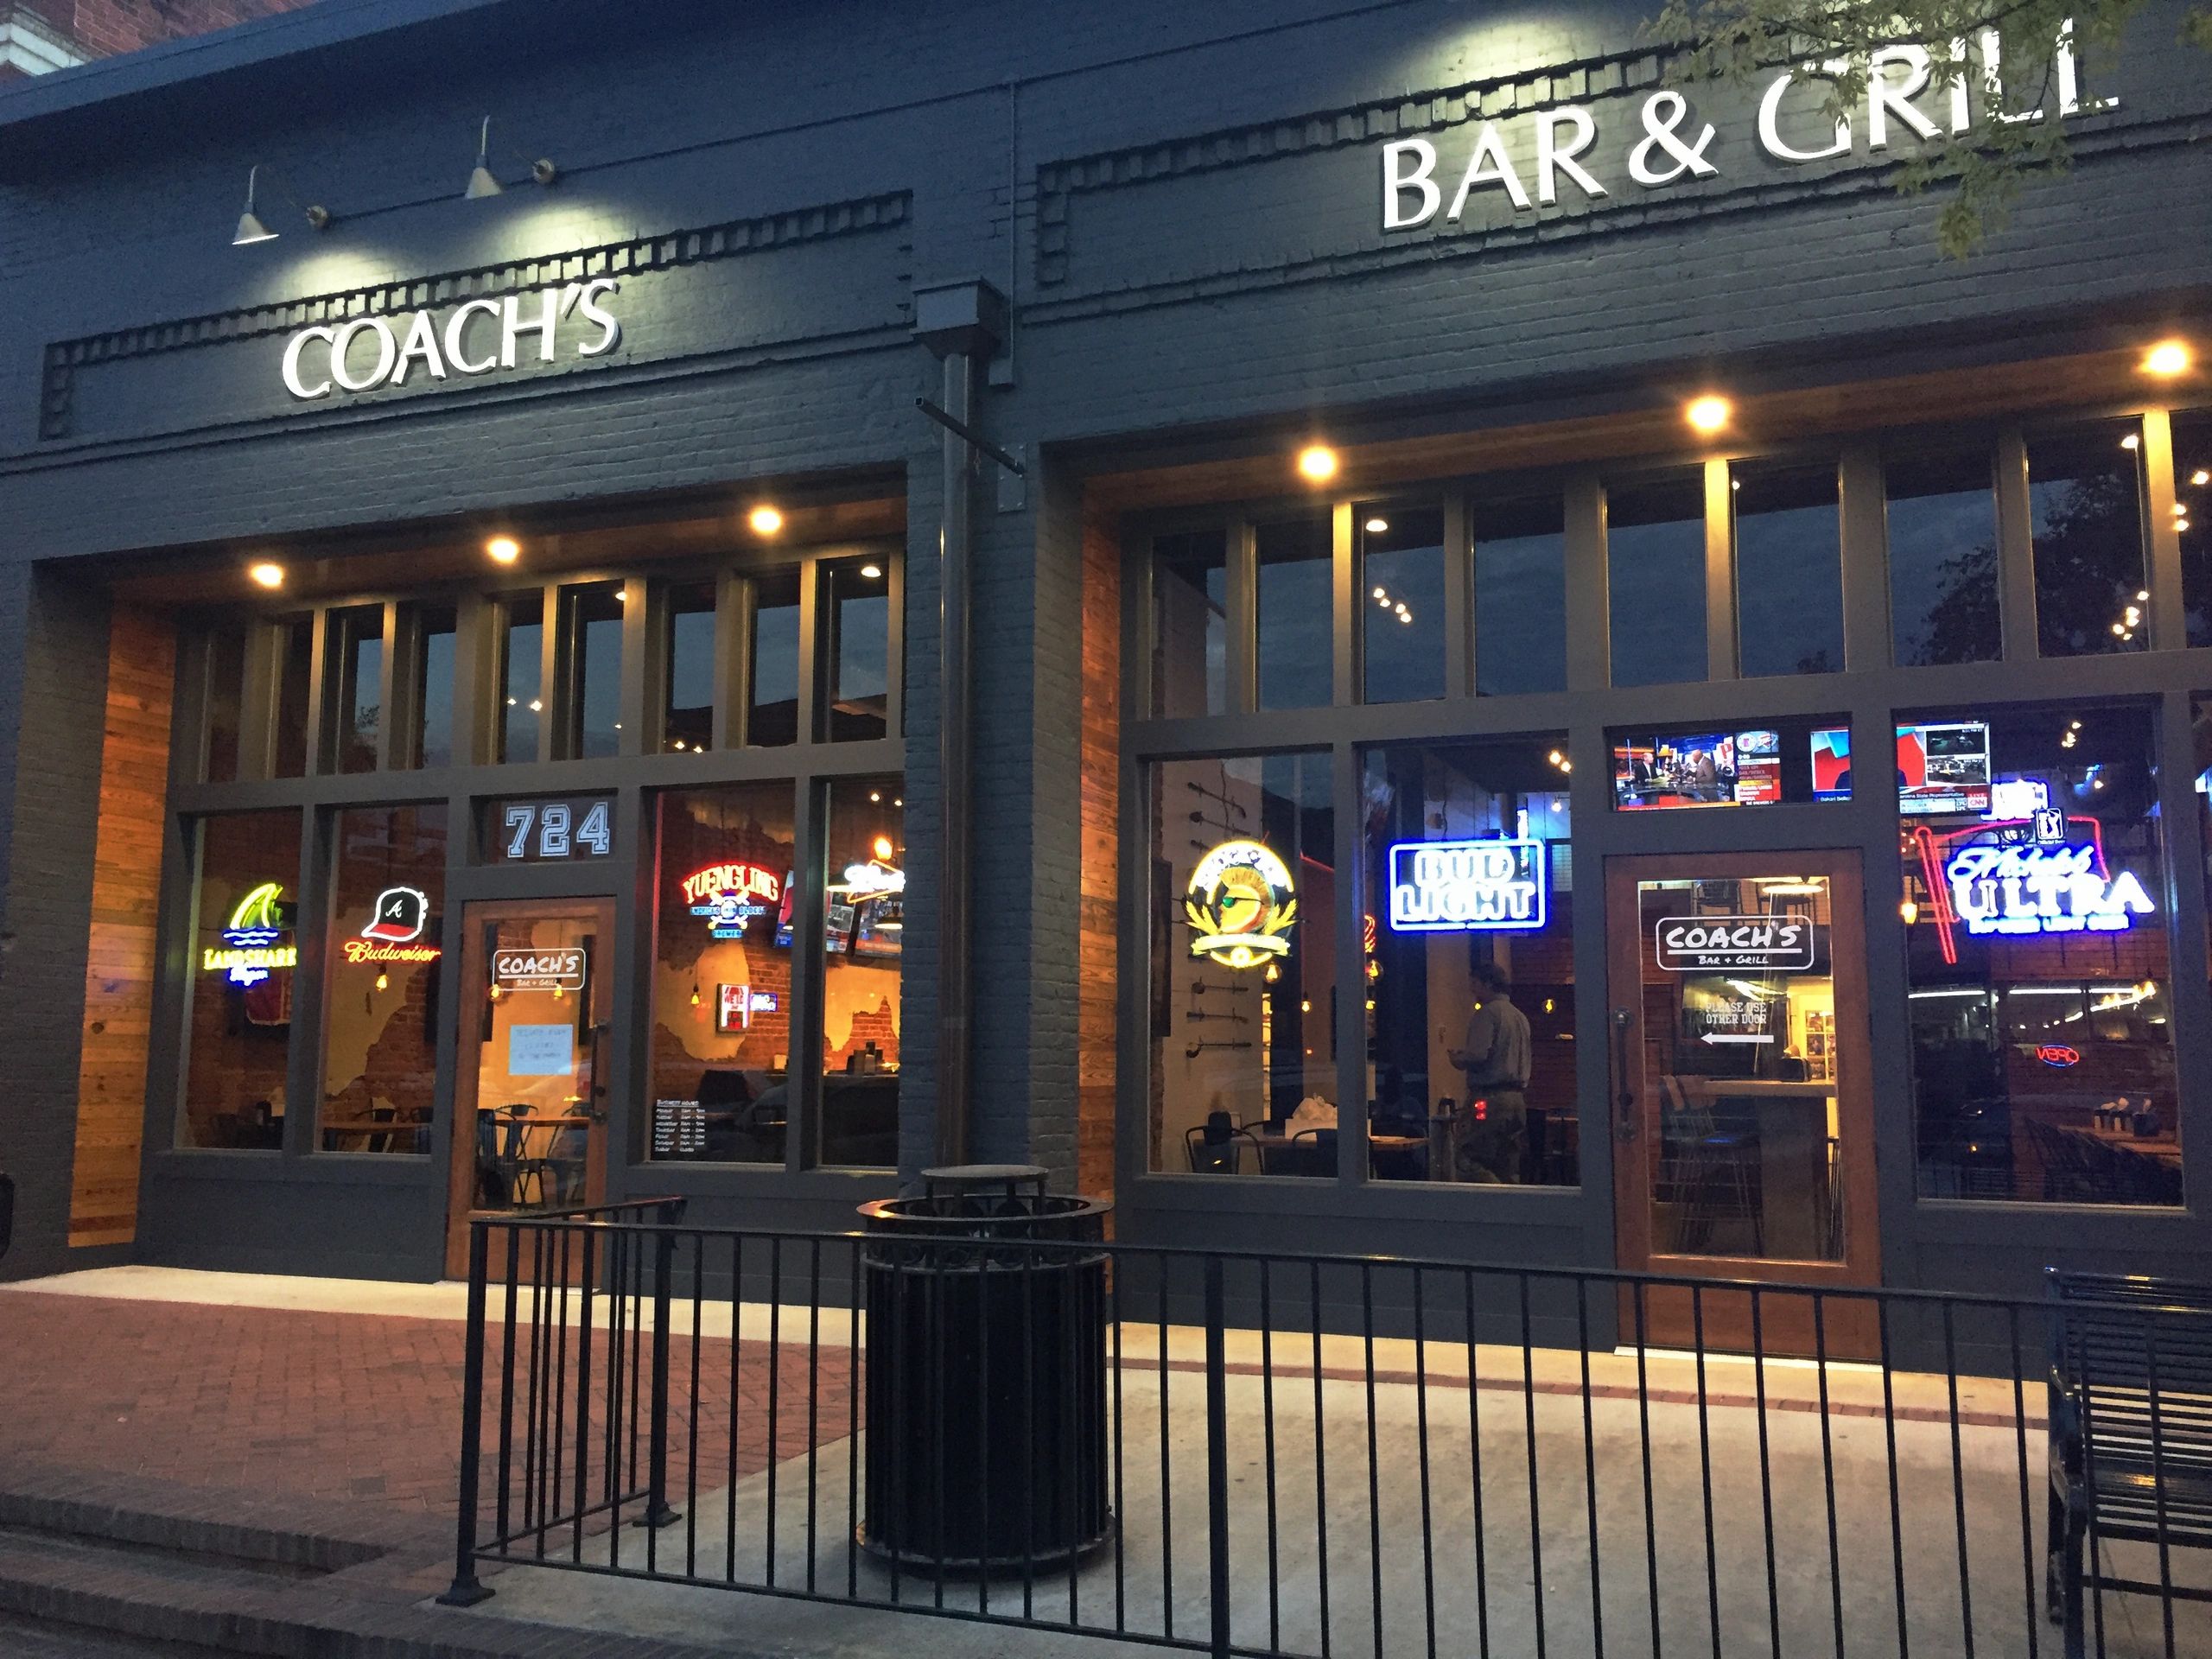 Coach's Bar and Grill - Restaurant, Bar and Grill